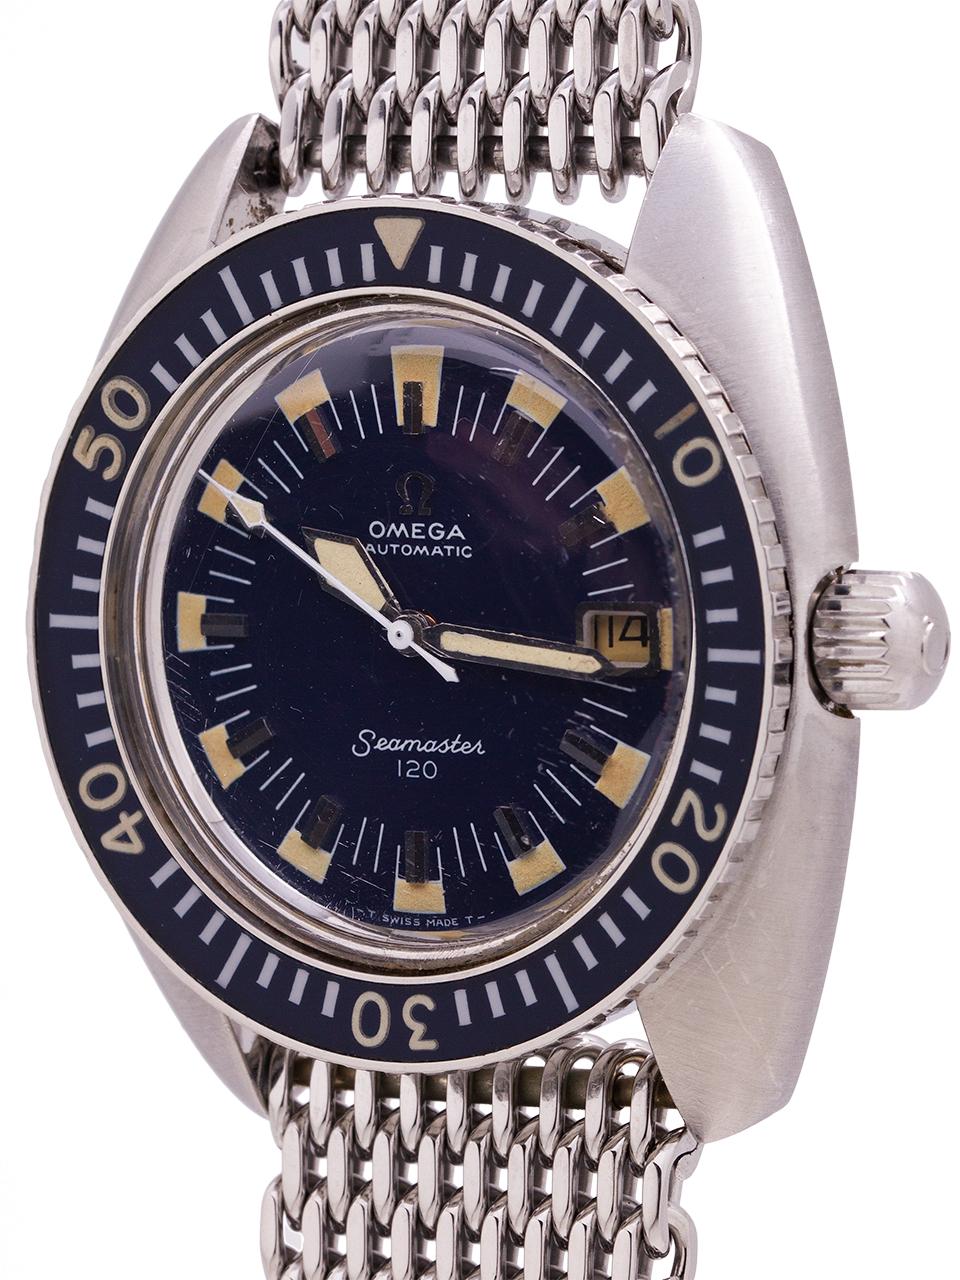 
Scarce and beautiful condition example Omega Seamaster 120 ref 166.073 stainless steel diver’s model with movement serial # 30.3 million circa 1970. Heavy cushion shaped 43 X 46mm case with original wide rotating dark blue elapsed time bezel,